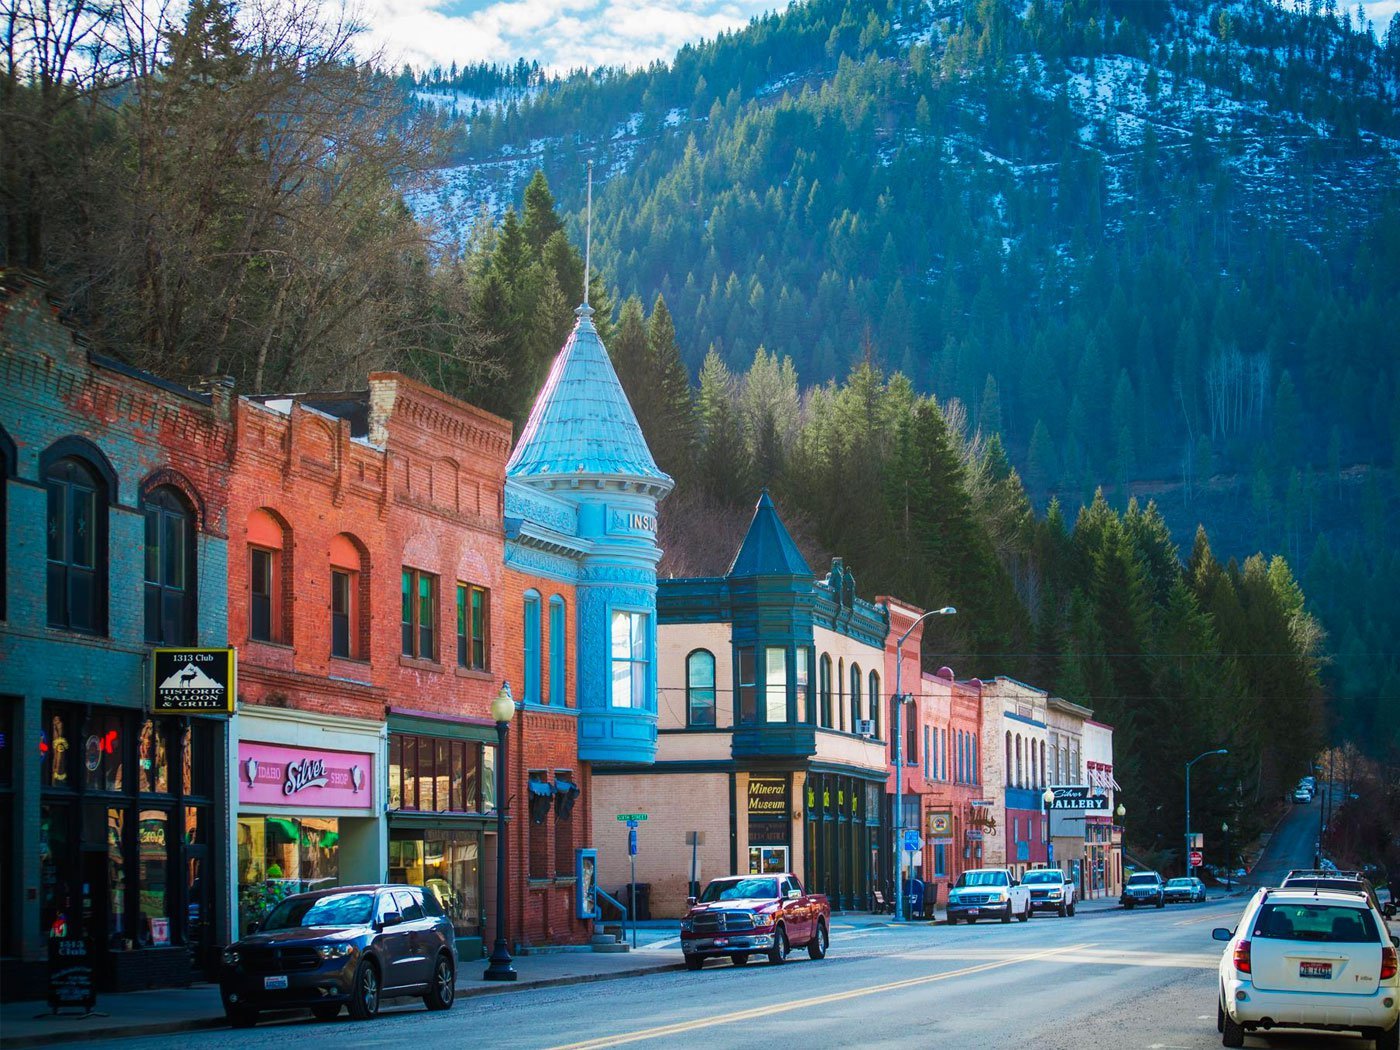 The 15 Best Small Towns to Visit in 2021